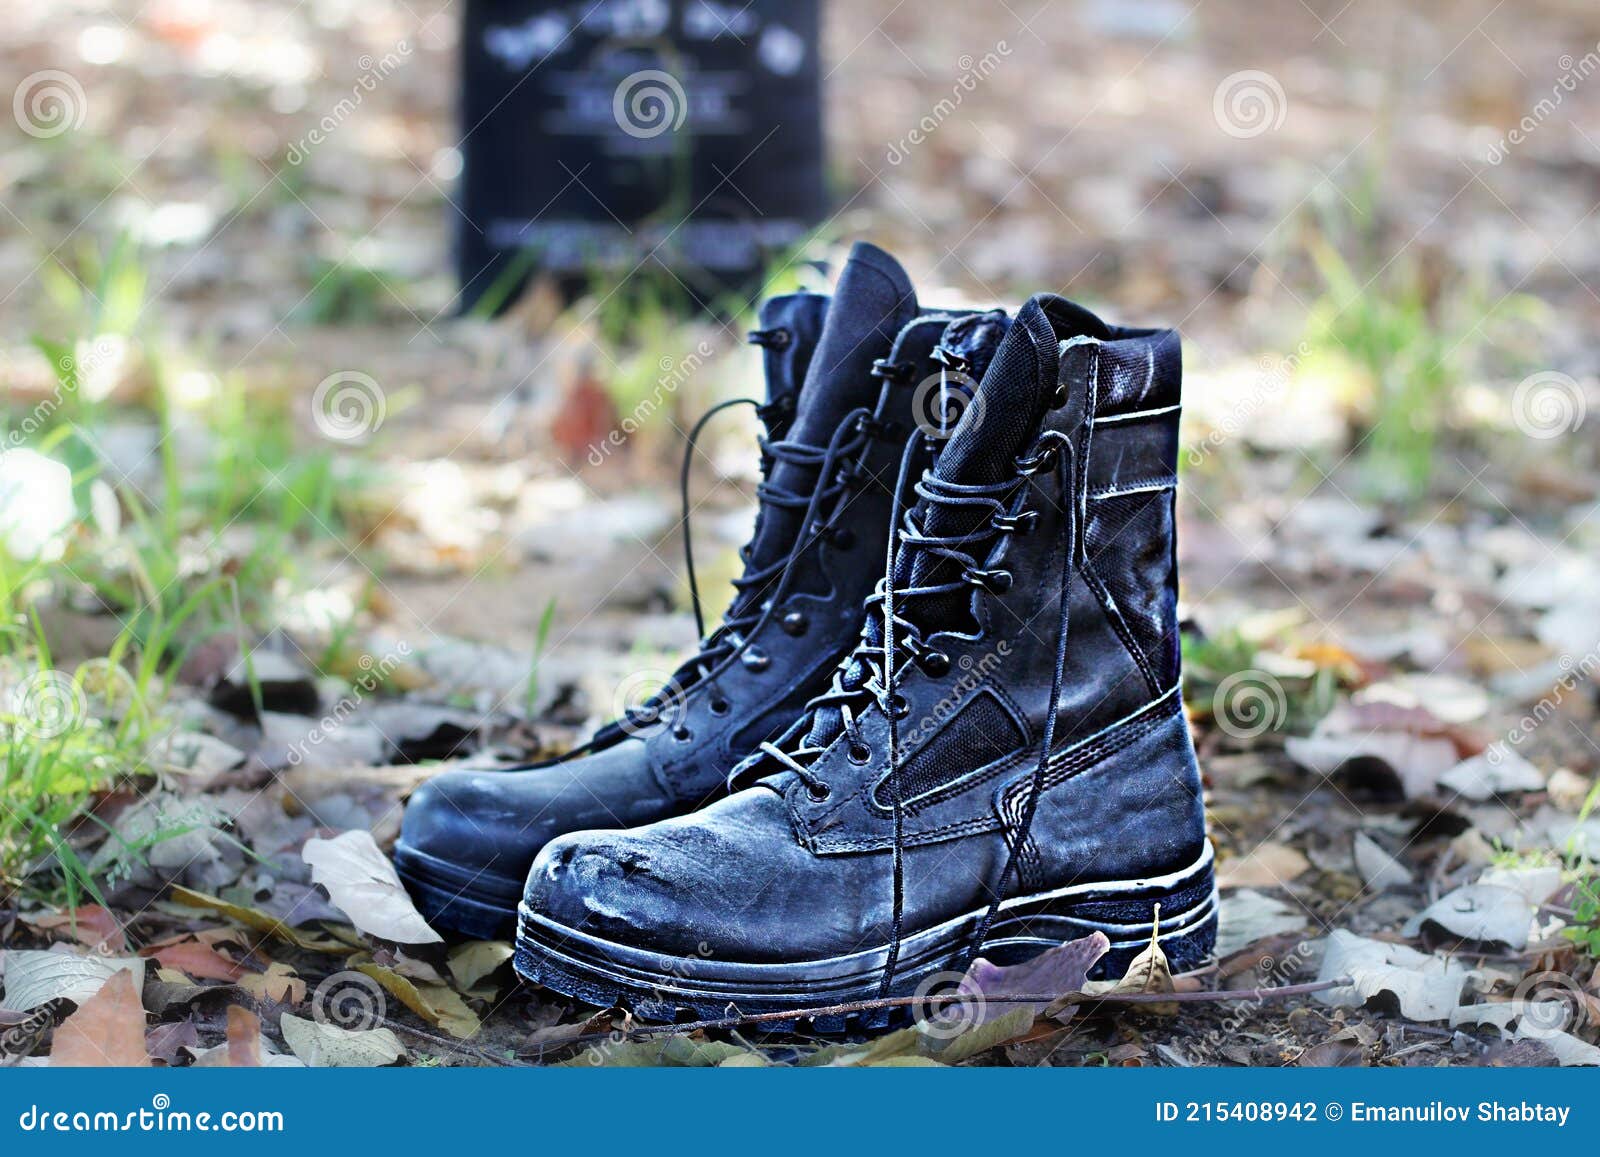 israel memorial day, yom hazikaron, concept. israeli soldier boots on the graveyard in the background a monument